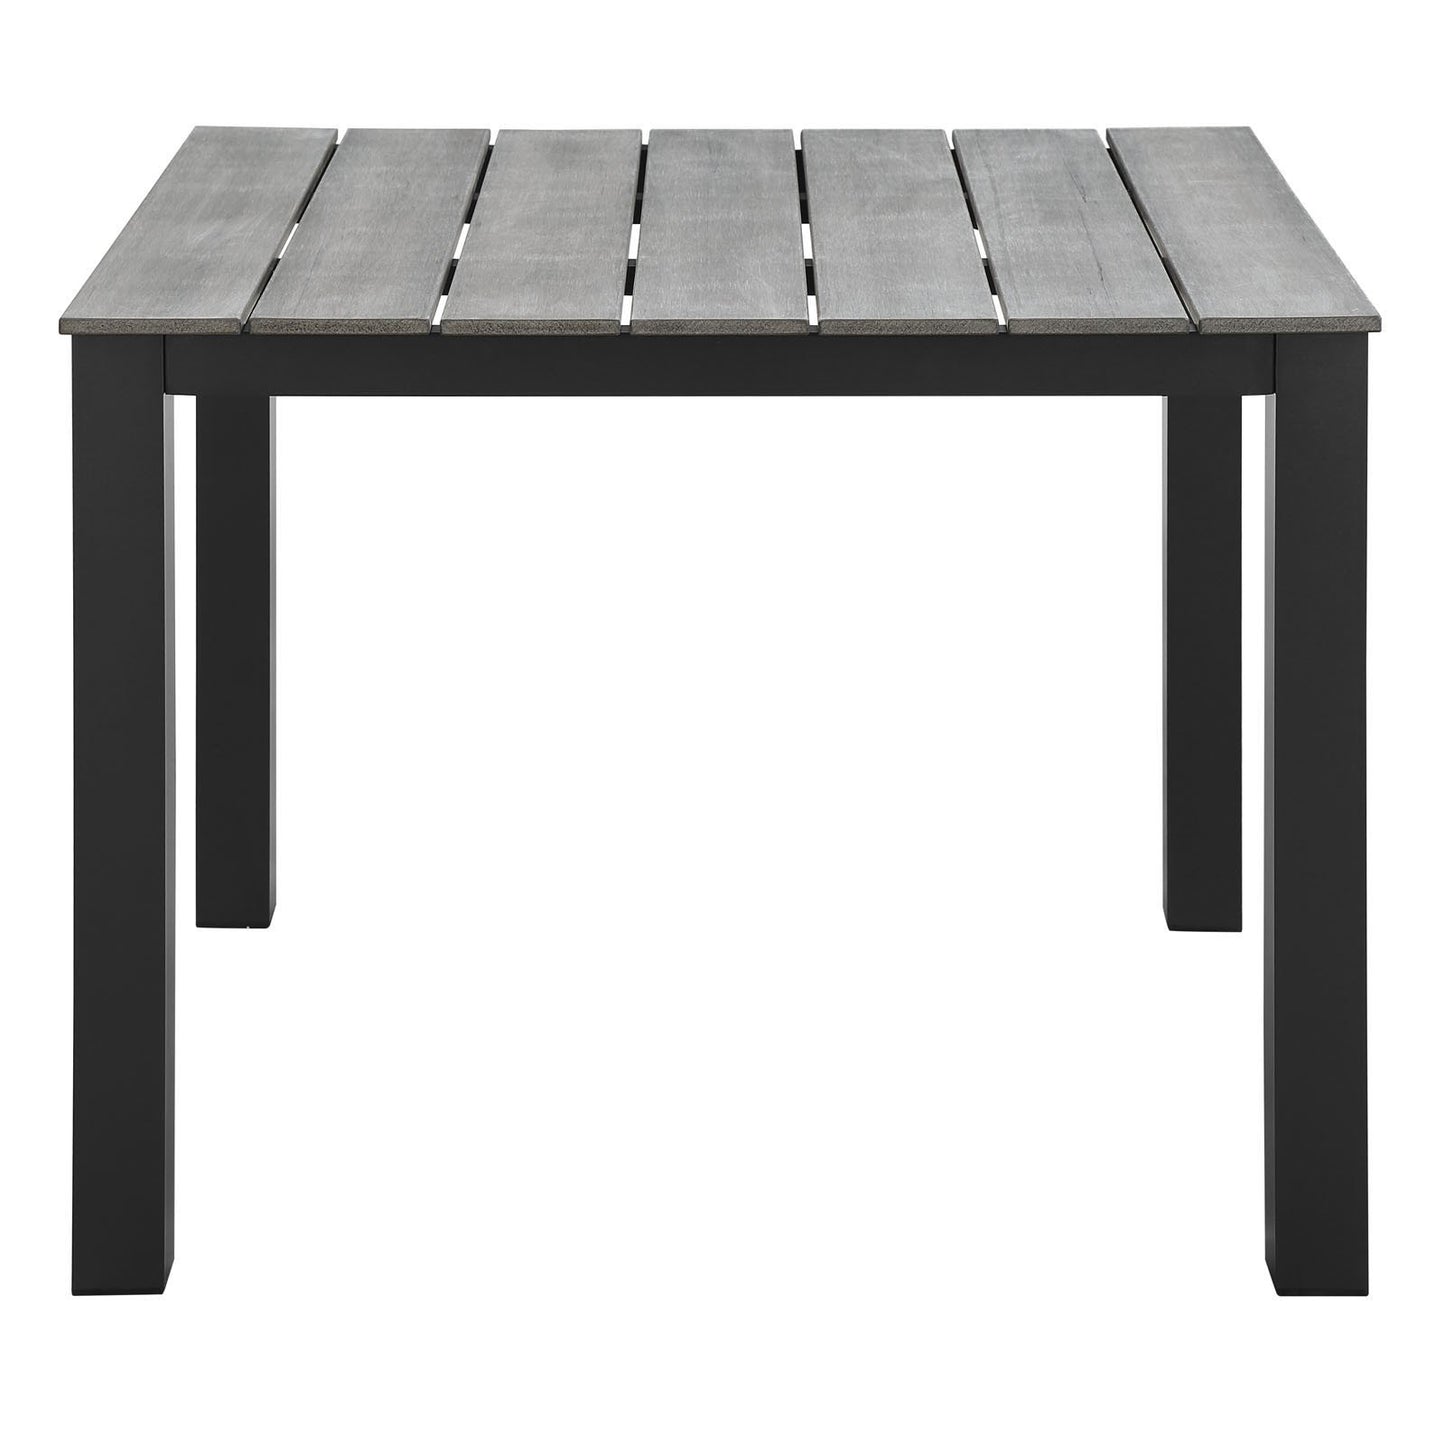 Morocco 40" Outdoor Patio Dining Table - living-essentials